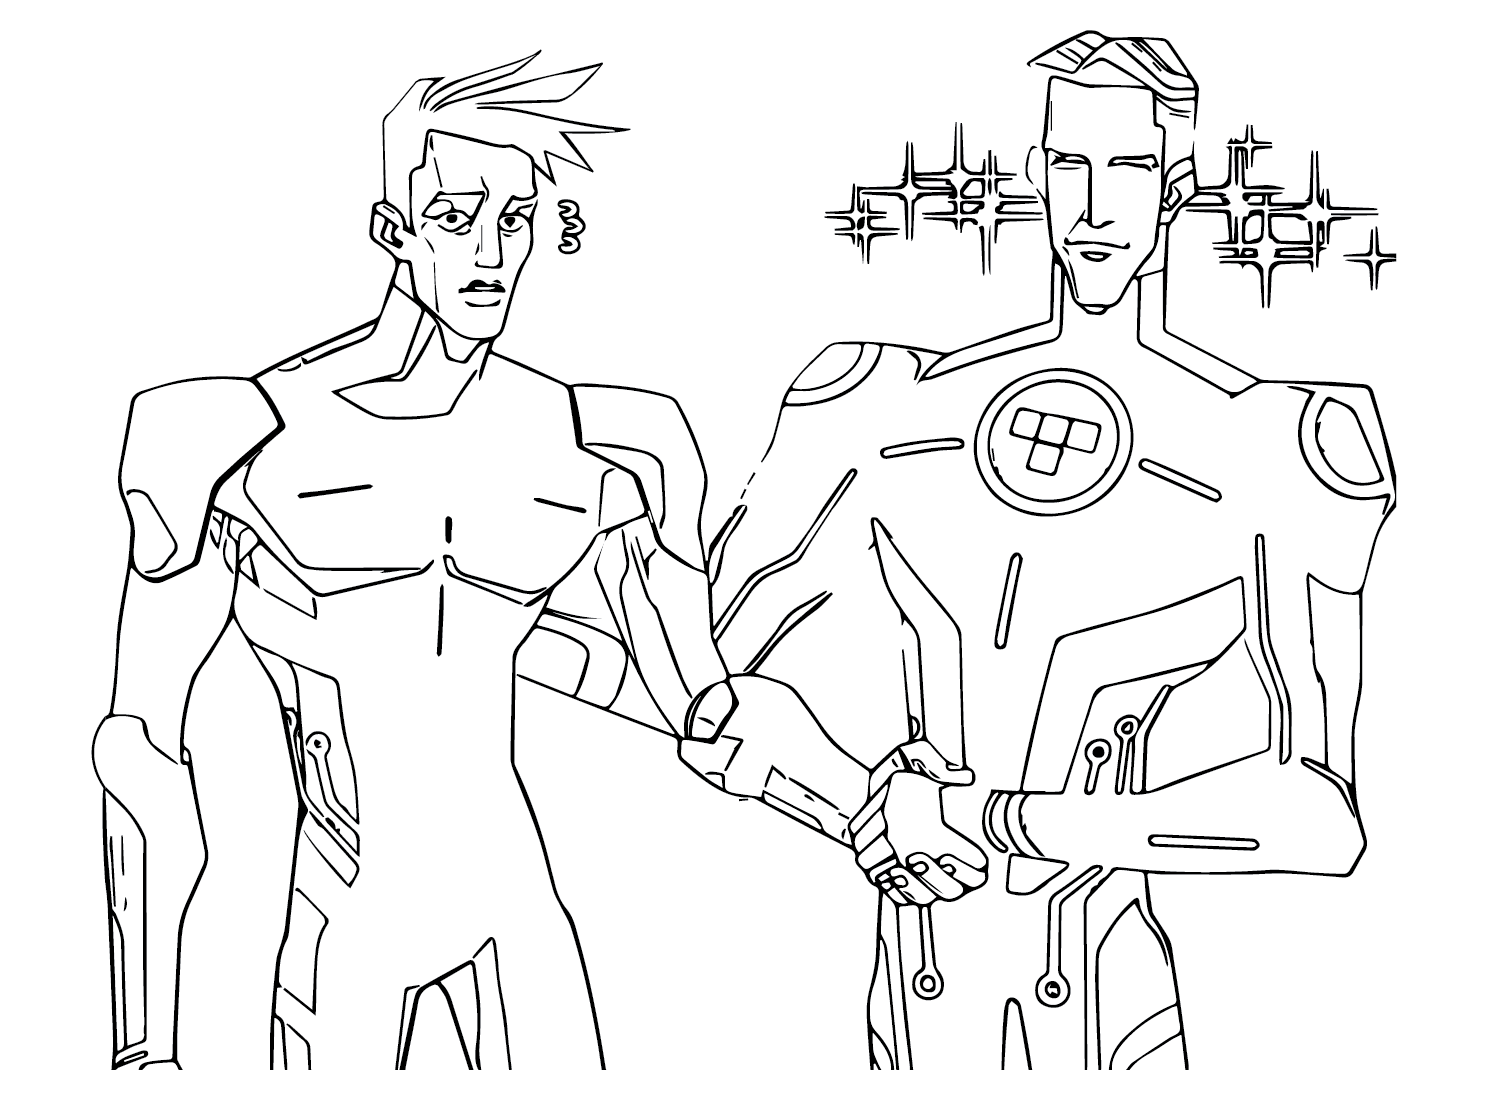 Drawing Tron from Tron